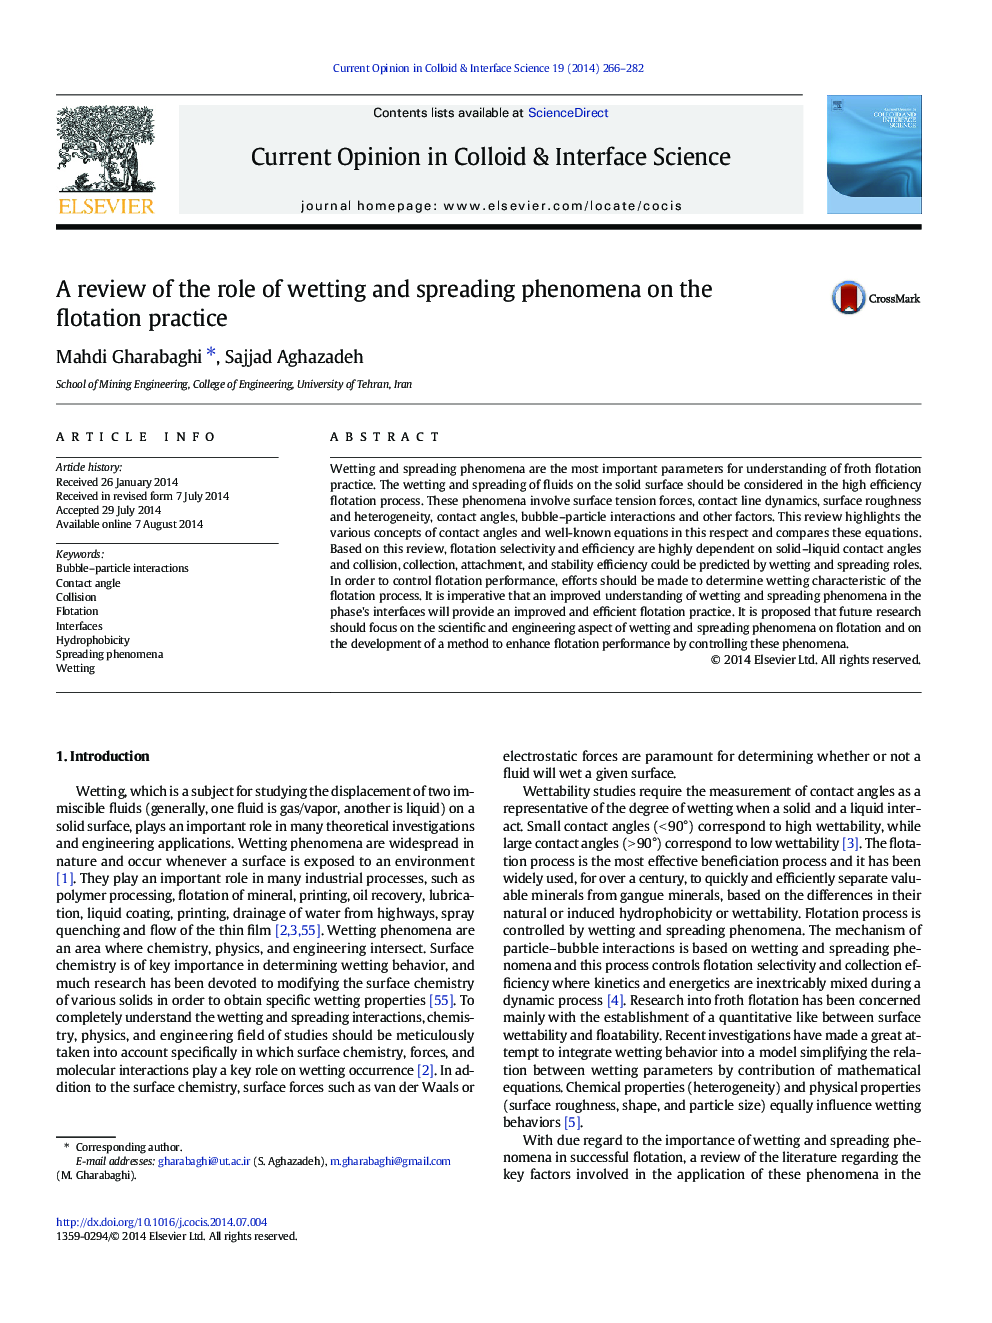 A review of the role of wetting and spreading phenomena on the flotation practice